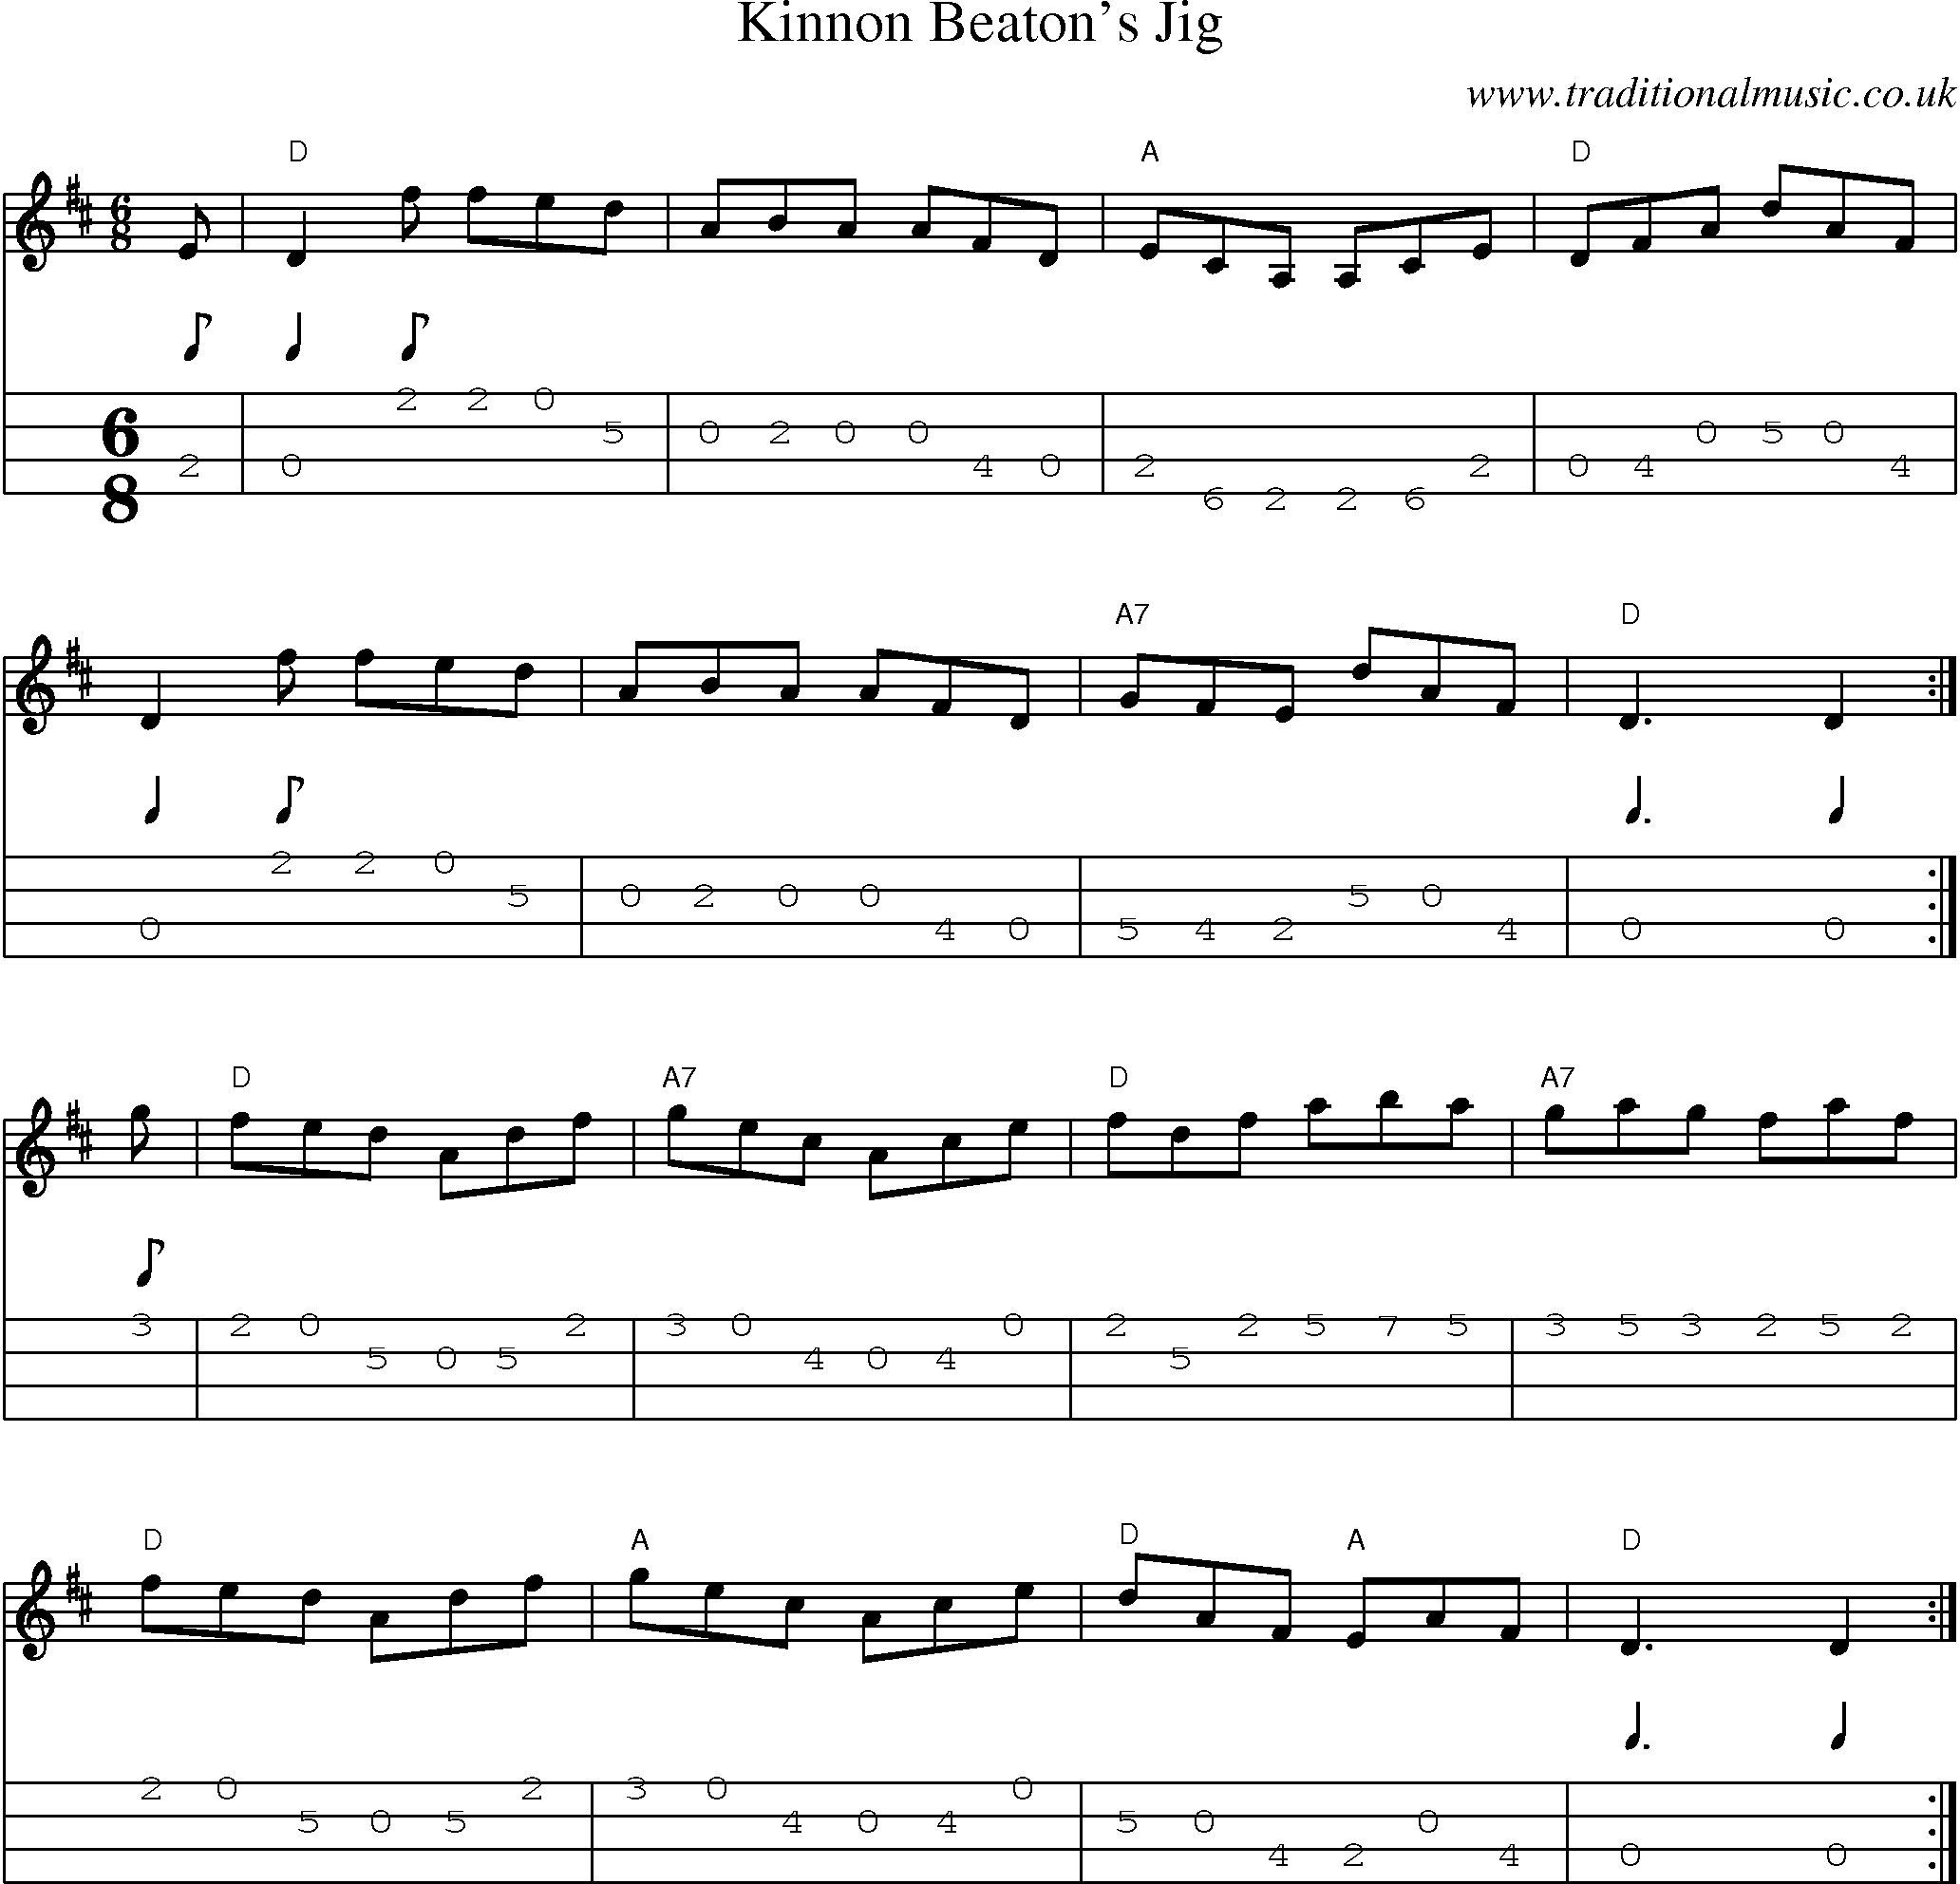 Music Score and Mandolin Tabs for Kinnon Beatons Jig